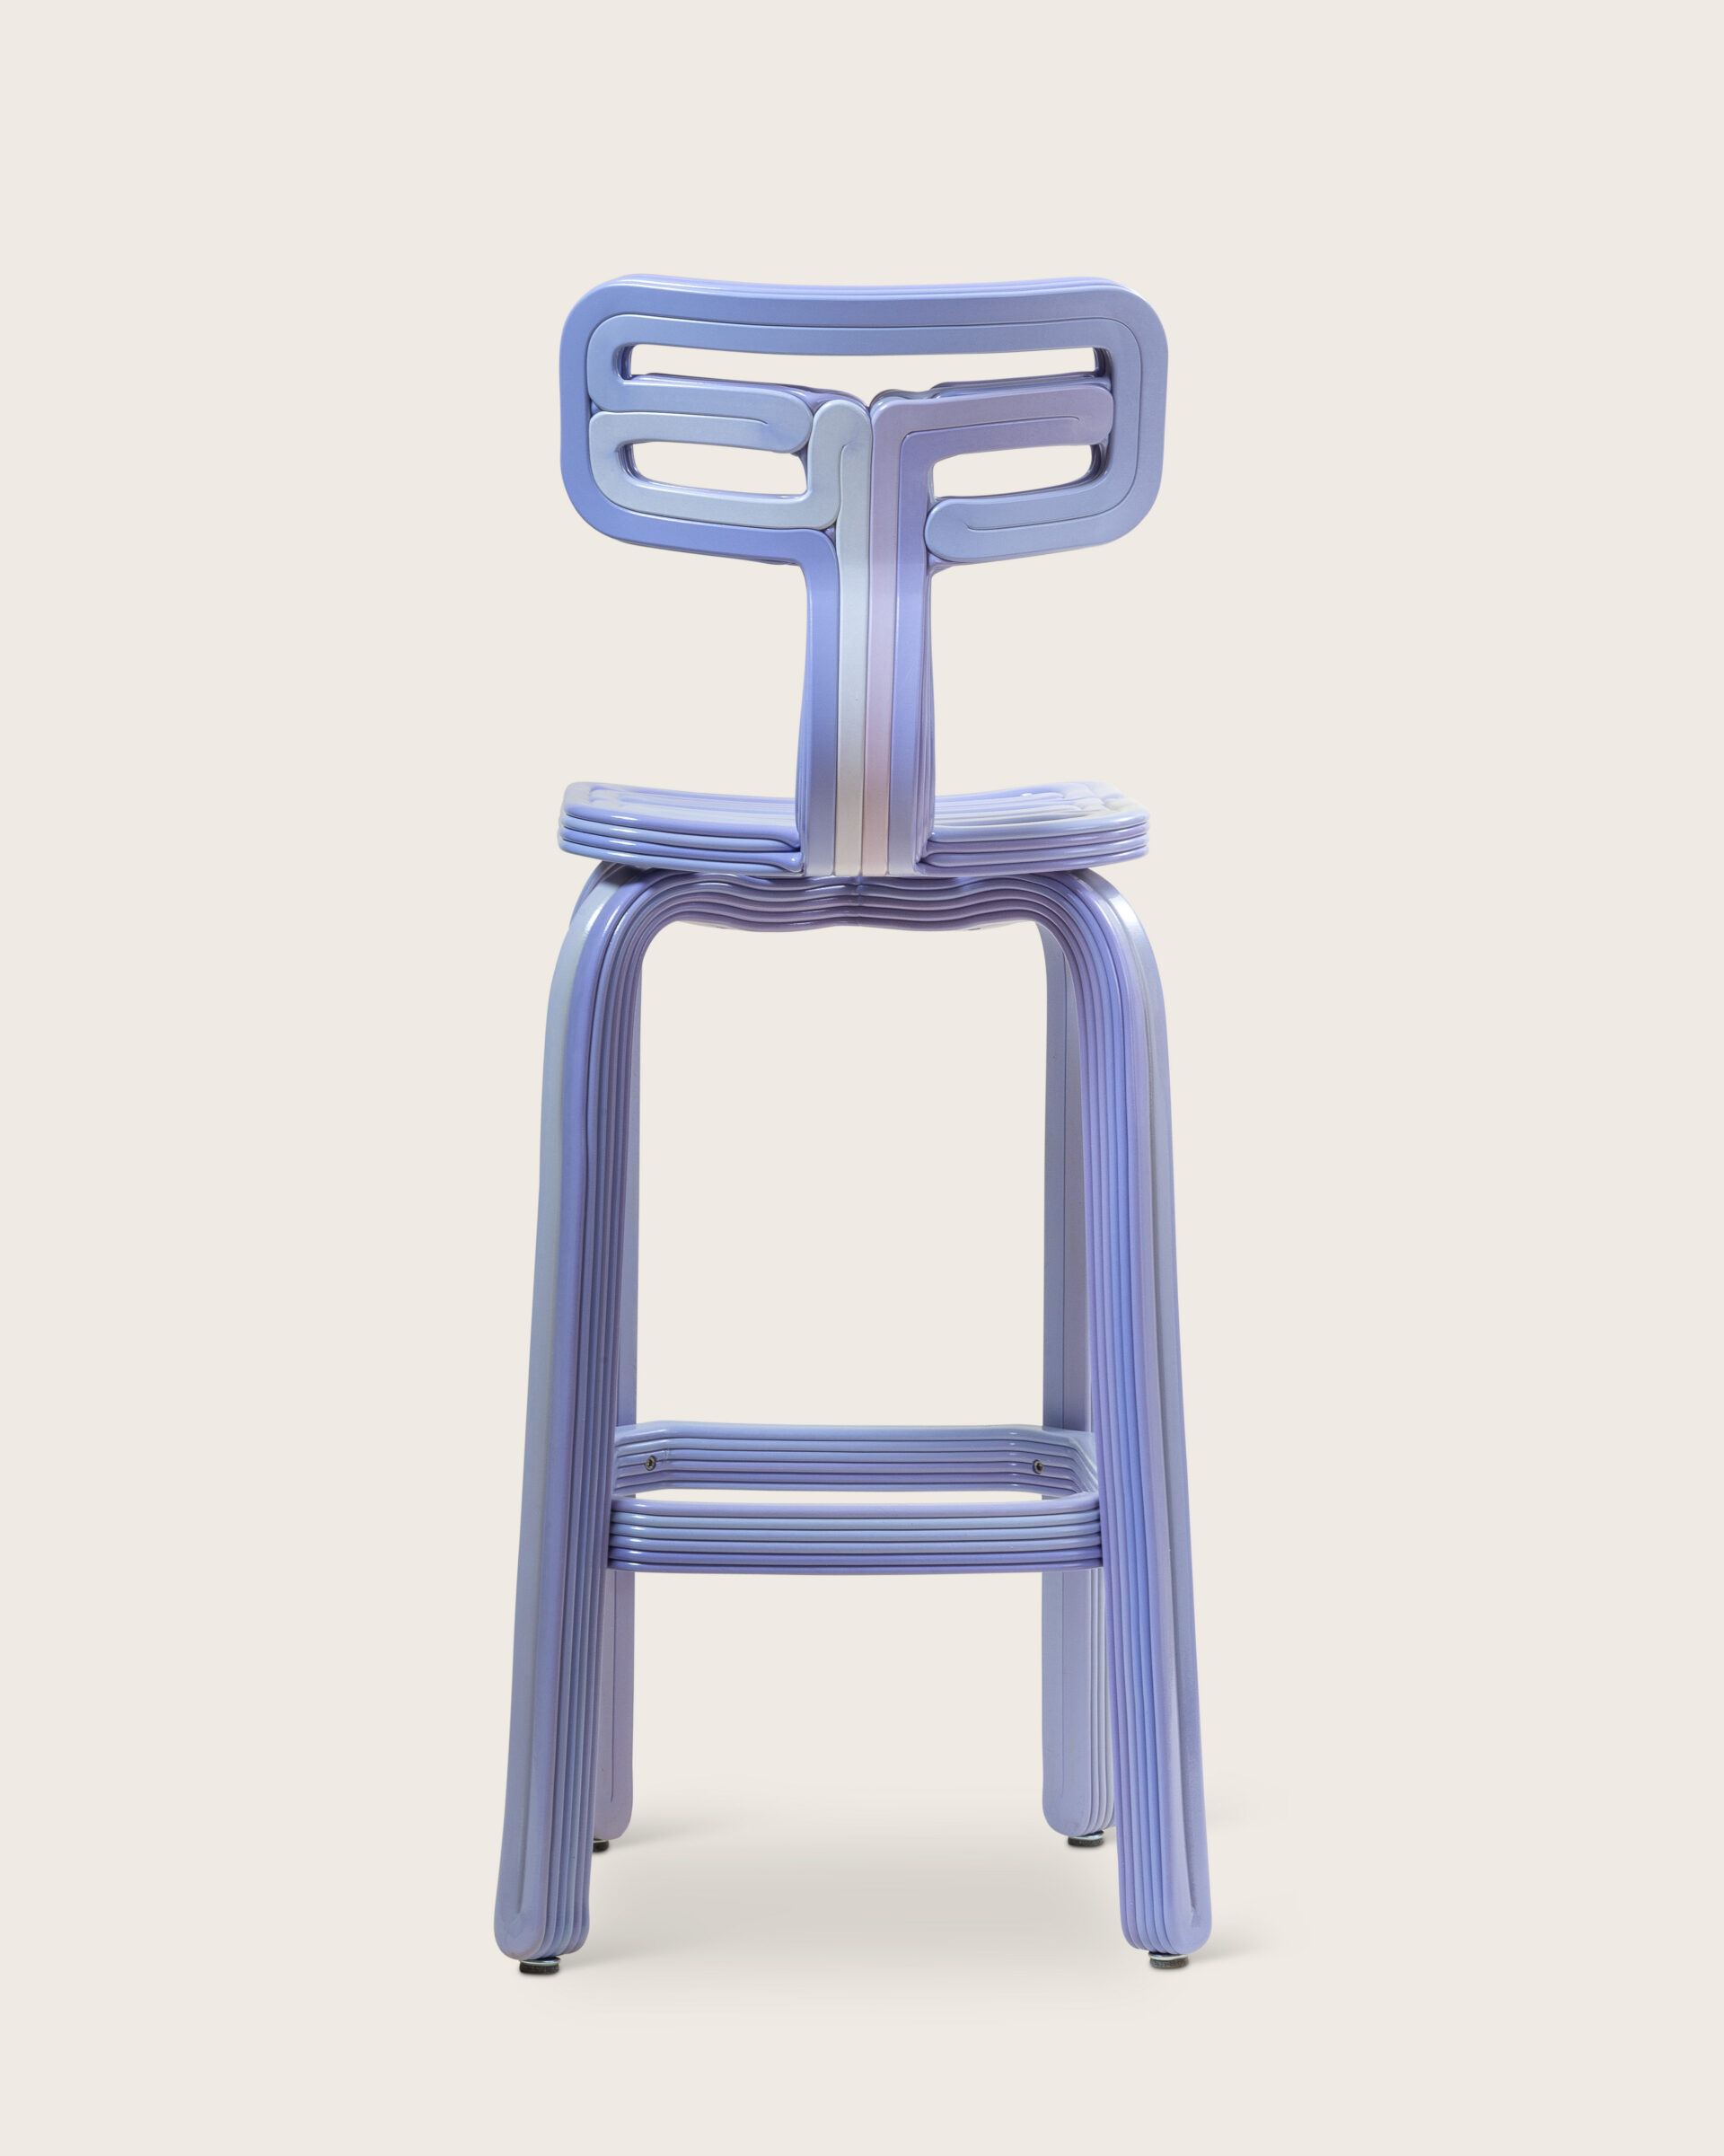 Kooij chubby chair bar forget me not